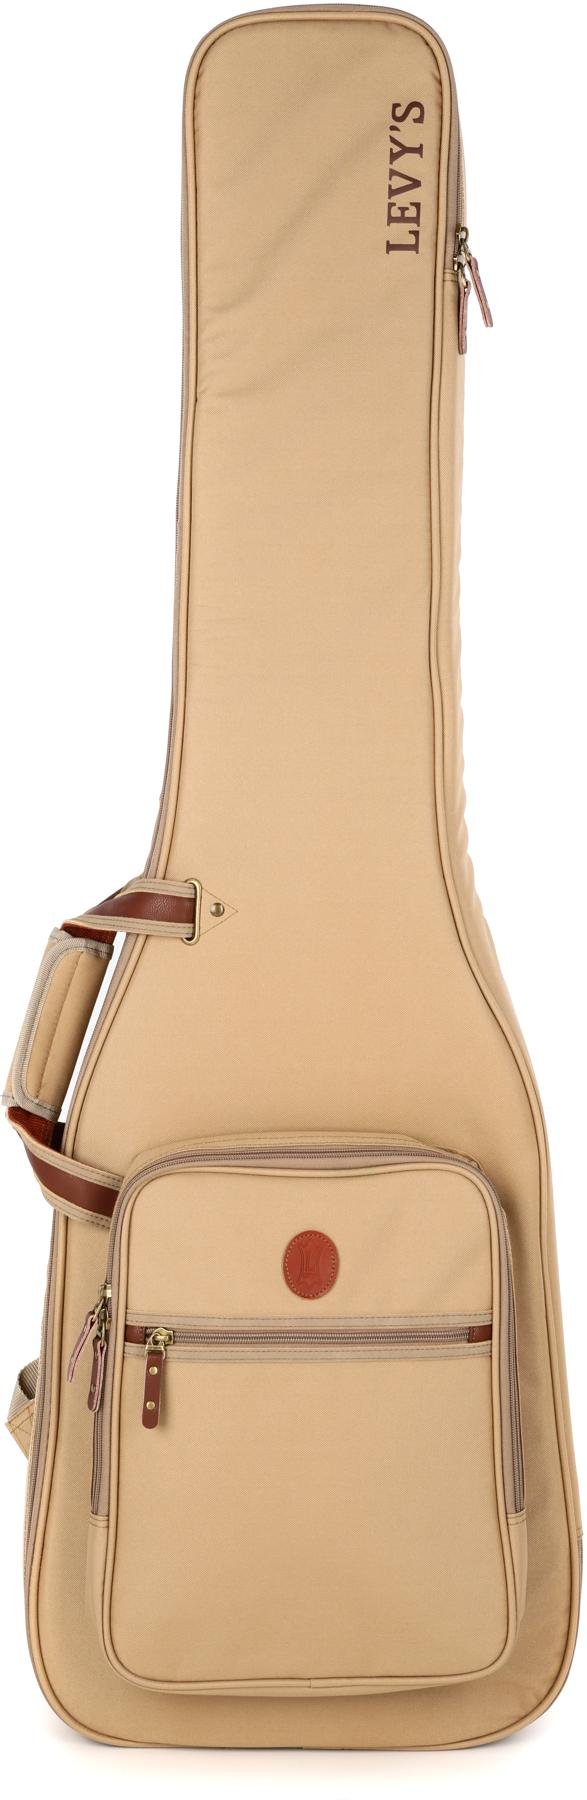 Levys Leathers Deluxe Gig Bag for Bass Guitars with Padded Backpack Straps and Large Exterior Pocket; Tan LVYBASSGB200